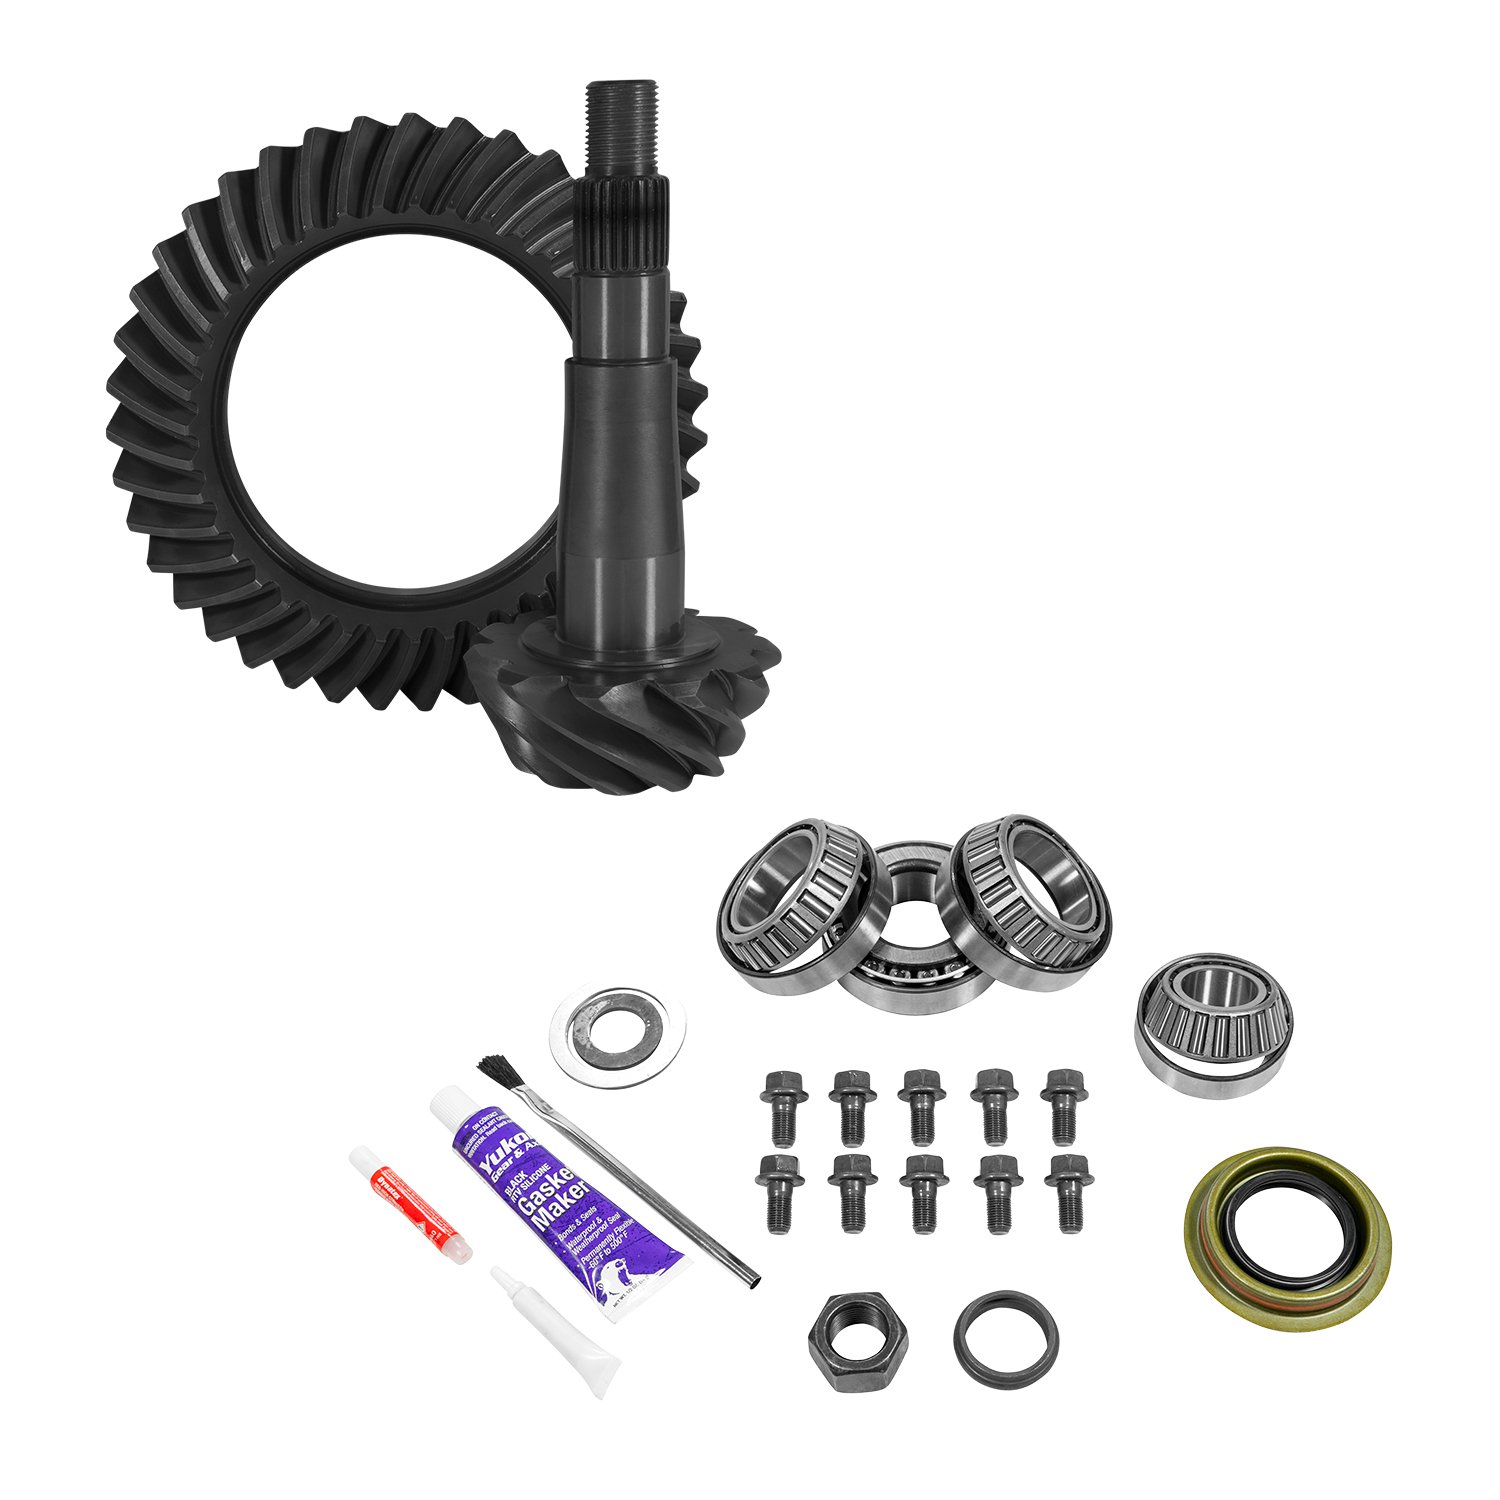 USA Standard 10656 8.25 in./ 213Mm Chy 3.73 Rear Ring & Pinion And Install Kit